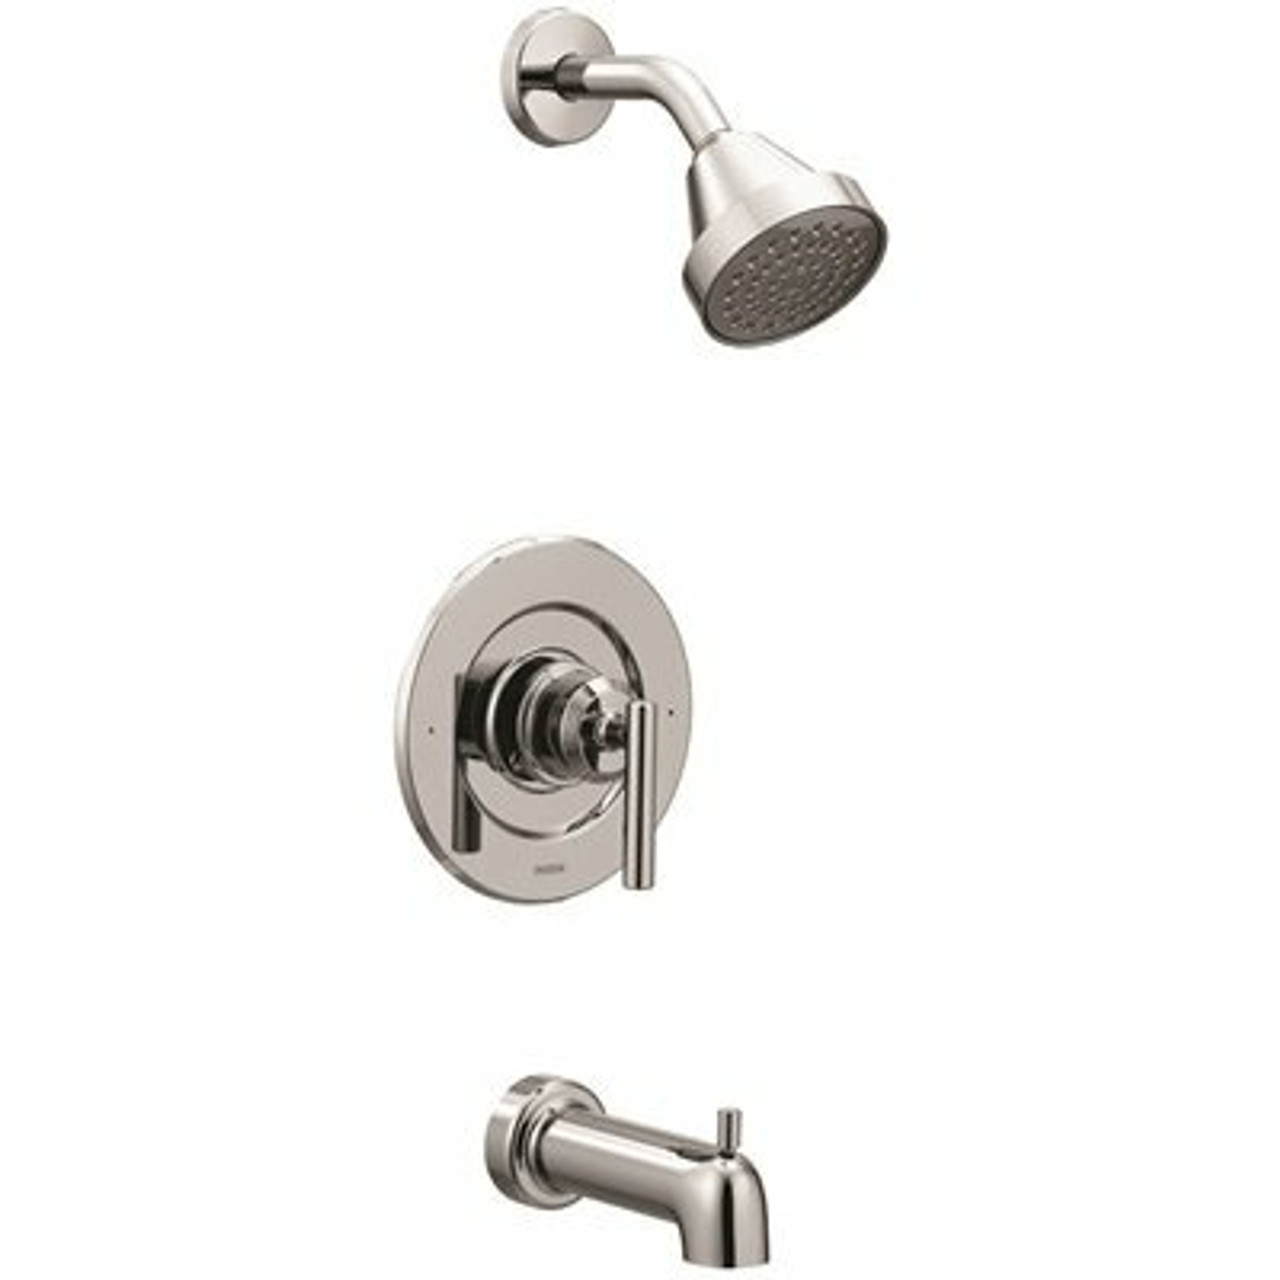 Moen Gibson Single-Handle Posi-Temp Tub And Shower Faucet Trim Kit In Chrome (Valve Not Included)